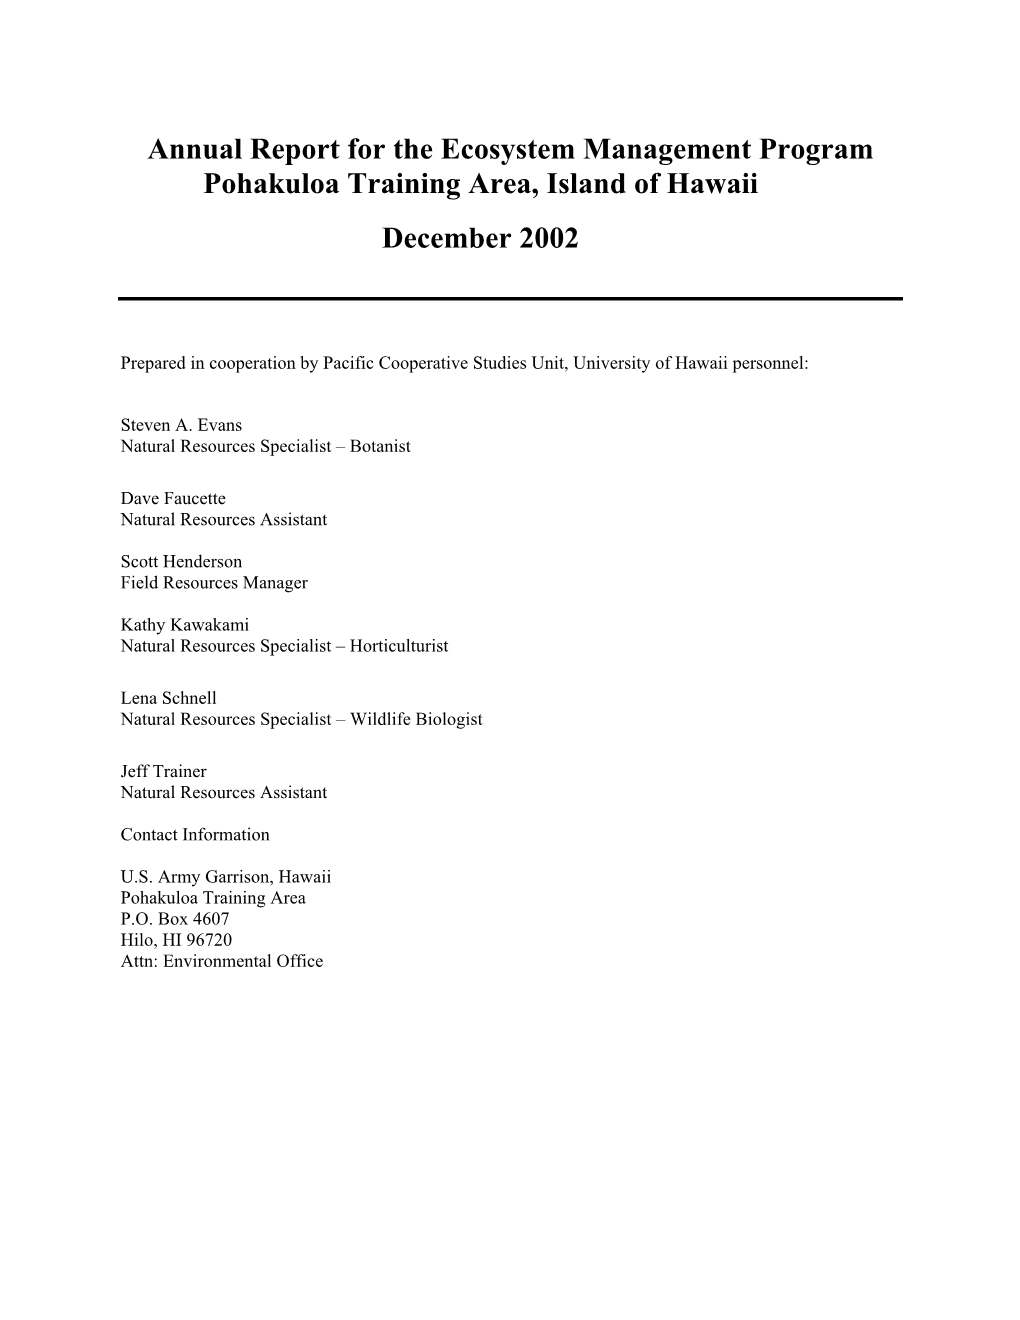 Annual Report for the Ecosystem Management Program Pohakuloa Training Area, Island of Hawaii December 2002